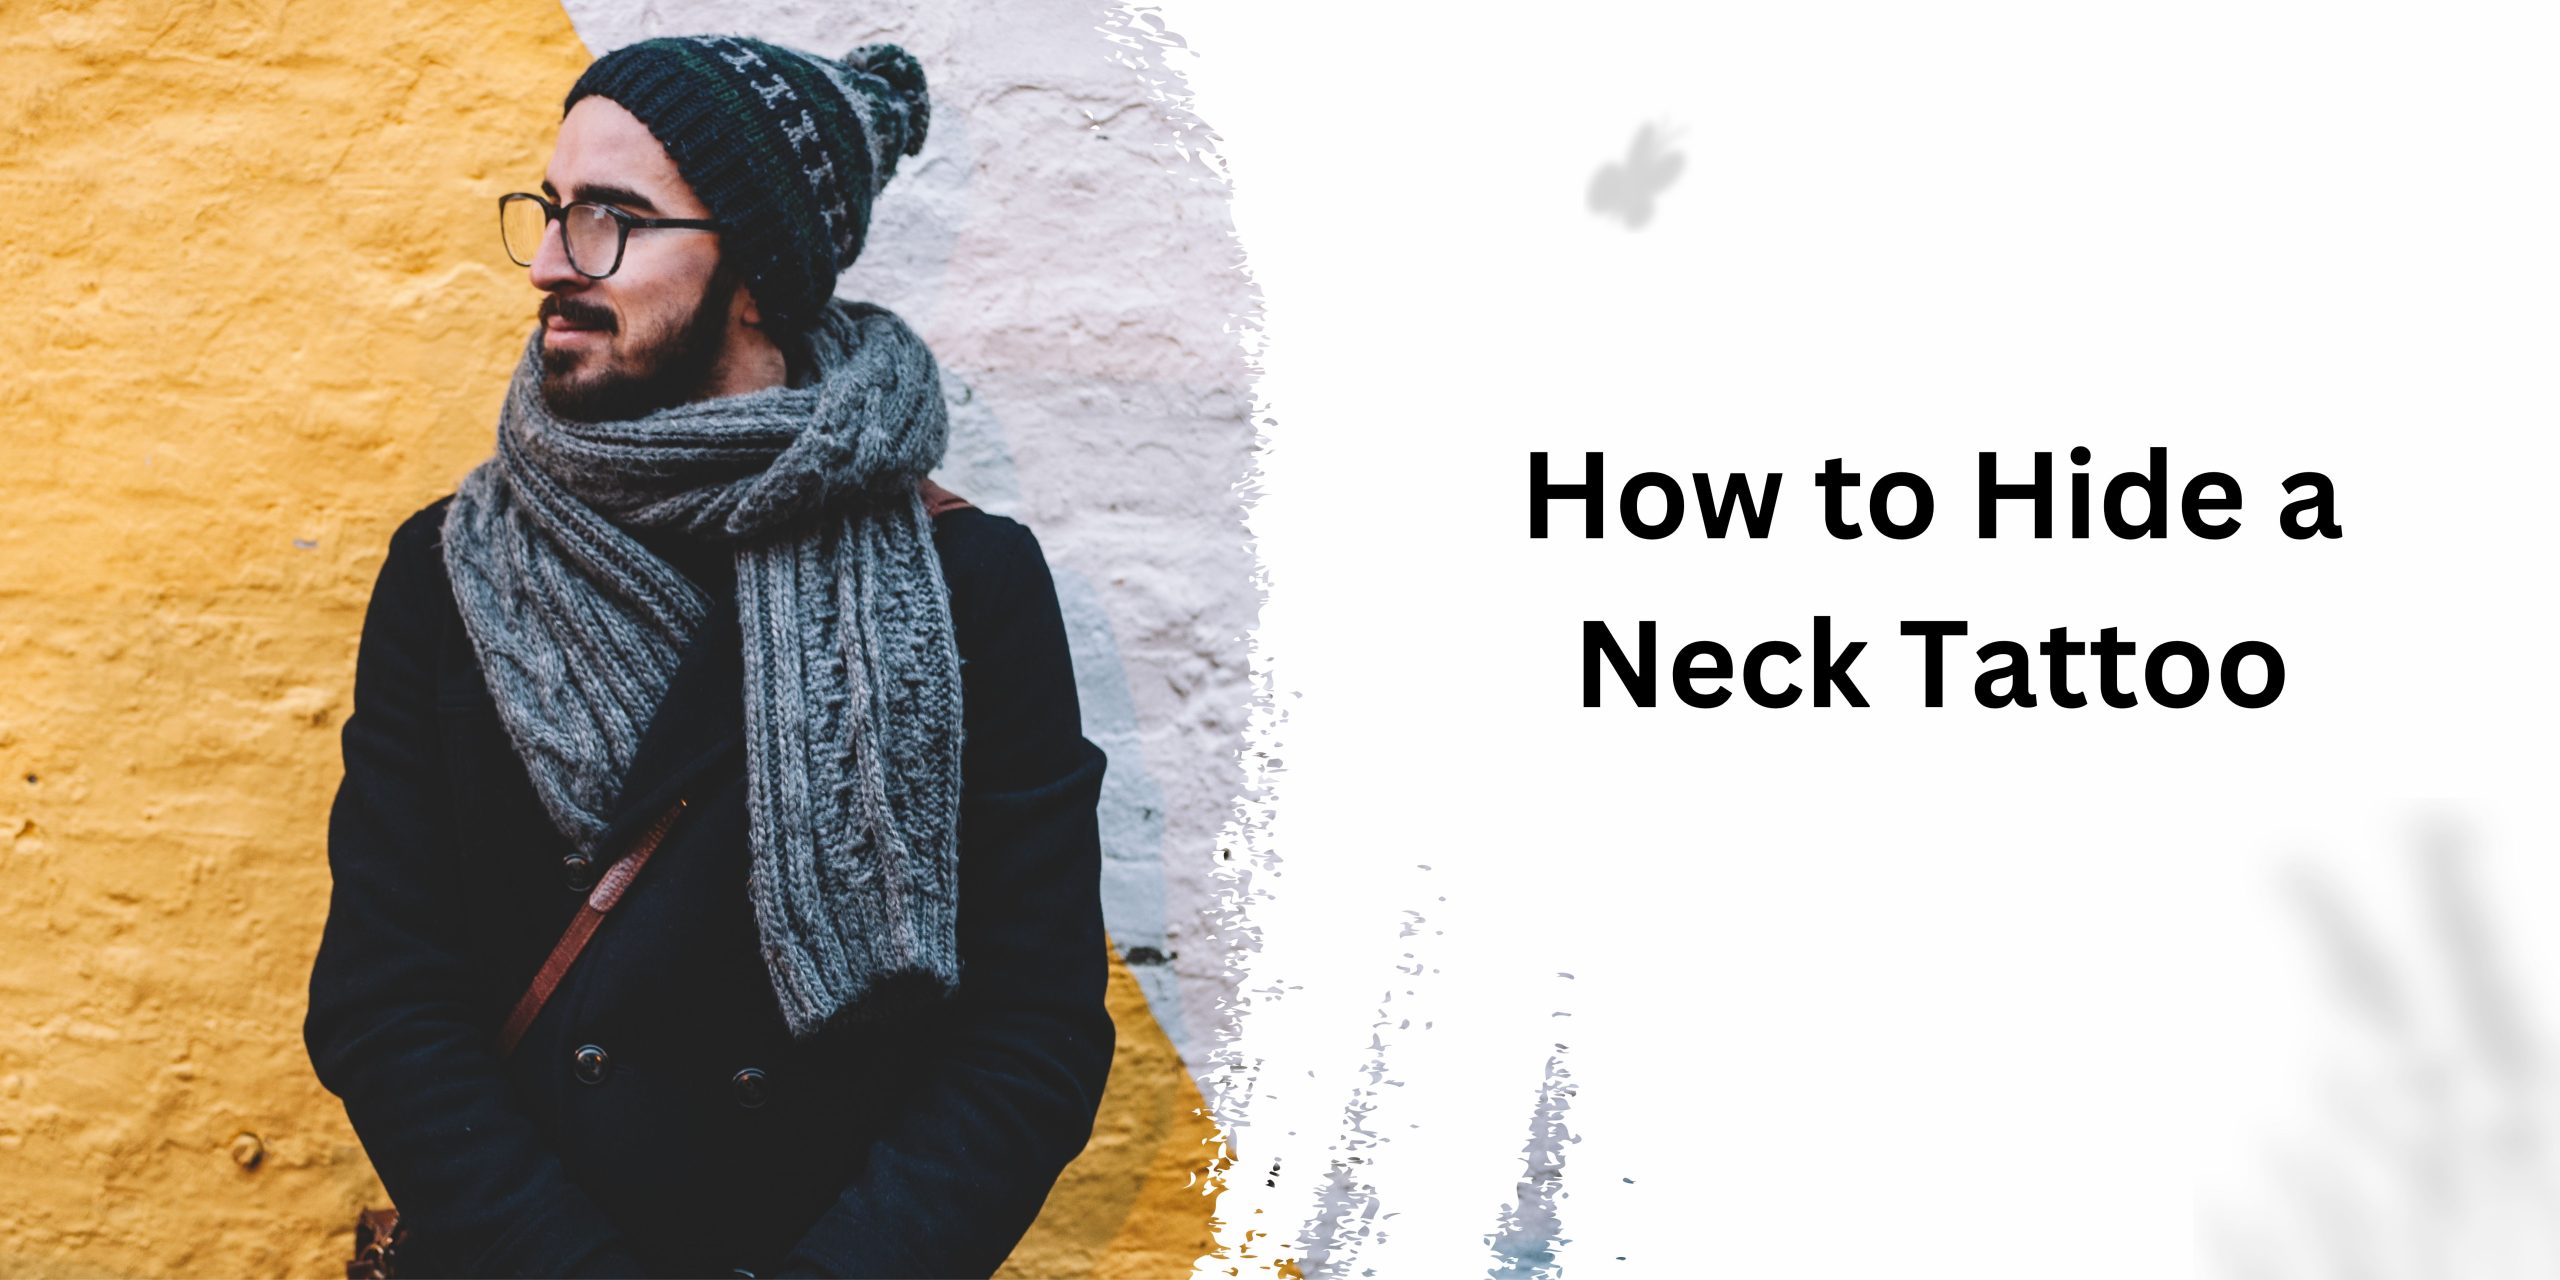 How to Hide a Neck Tattoo